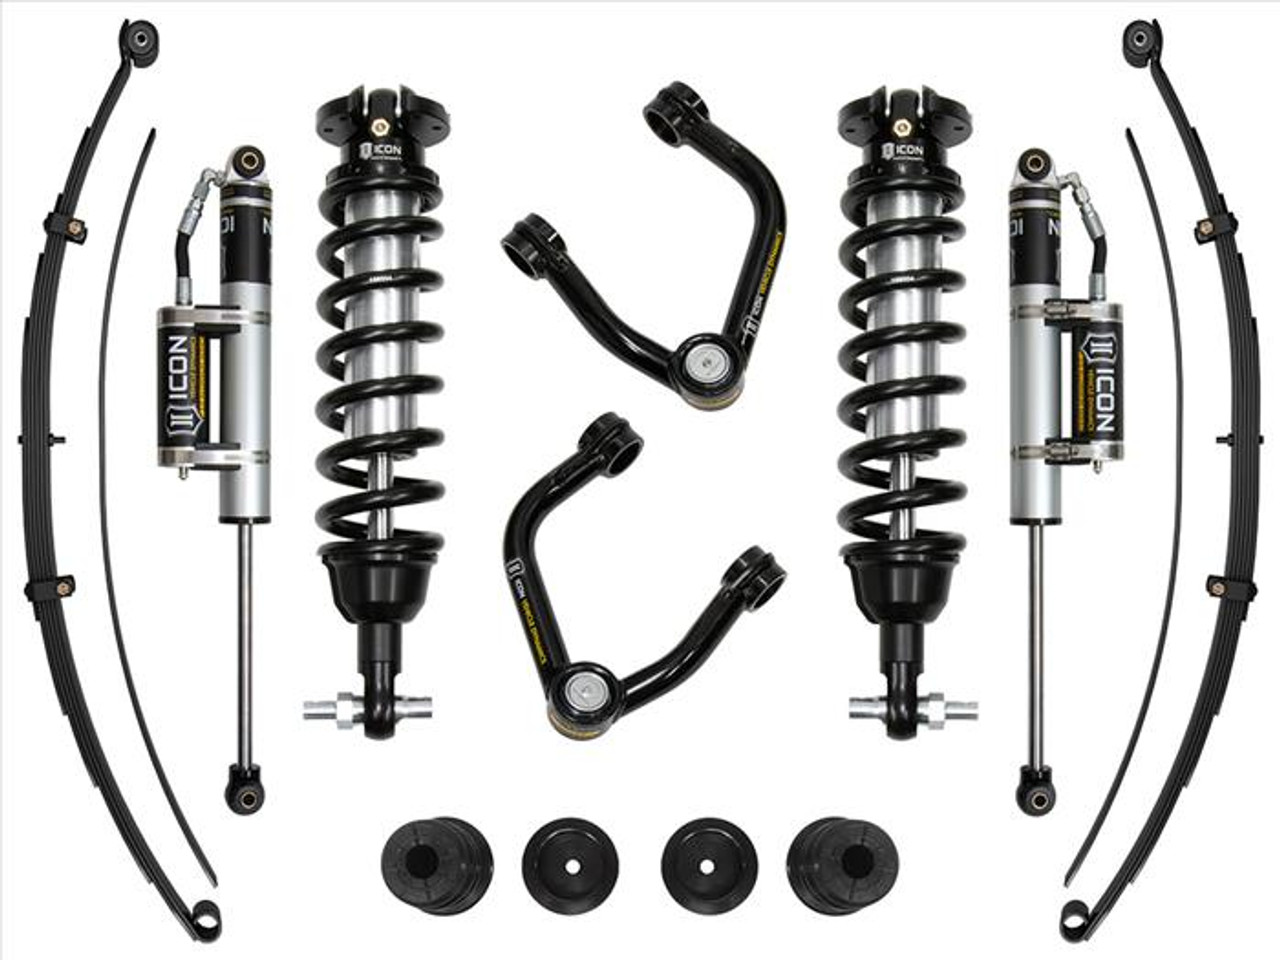 ICON 0-3.5" LIFT STAGE 6 SUSPENTION SYSTEM, TUBULAR UCA AL KNUCKLE for 2019 to 2021 Ford Ranger (K93206TA)